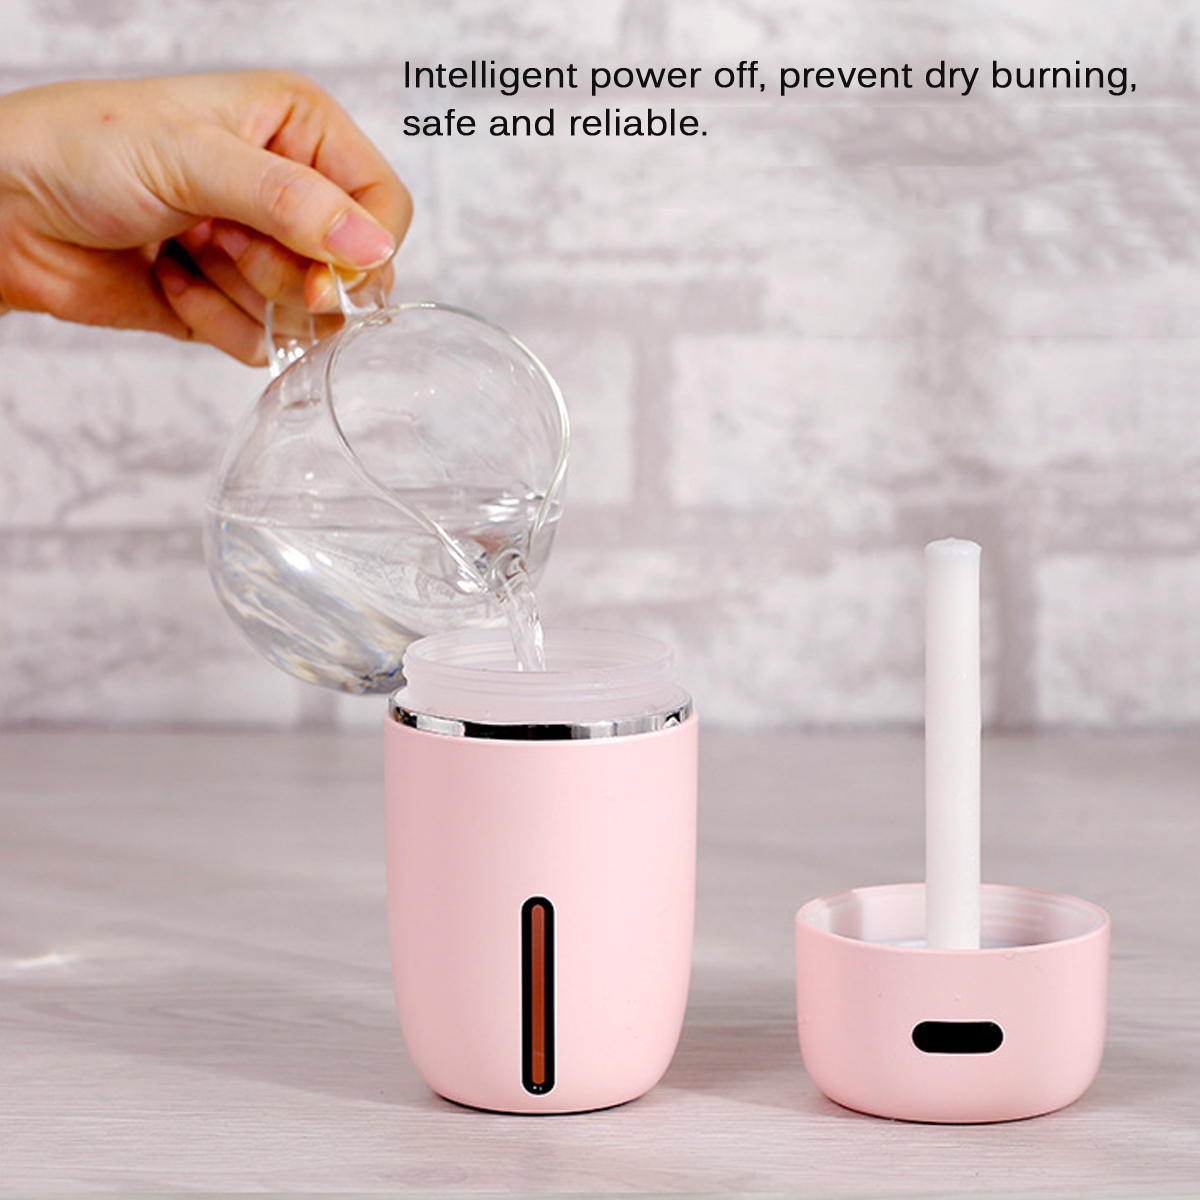 200ml-Electric-Air-Humidifier-Diffuser-Aroma-Mist-Purifier-LED-Light-USB-Charging-Power-Bank-for-Por-1809965-3